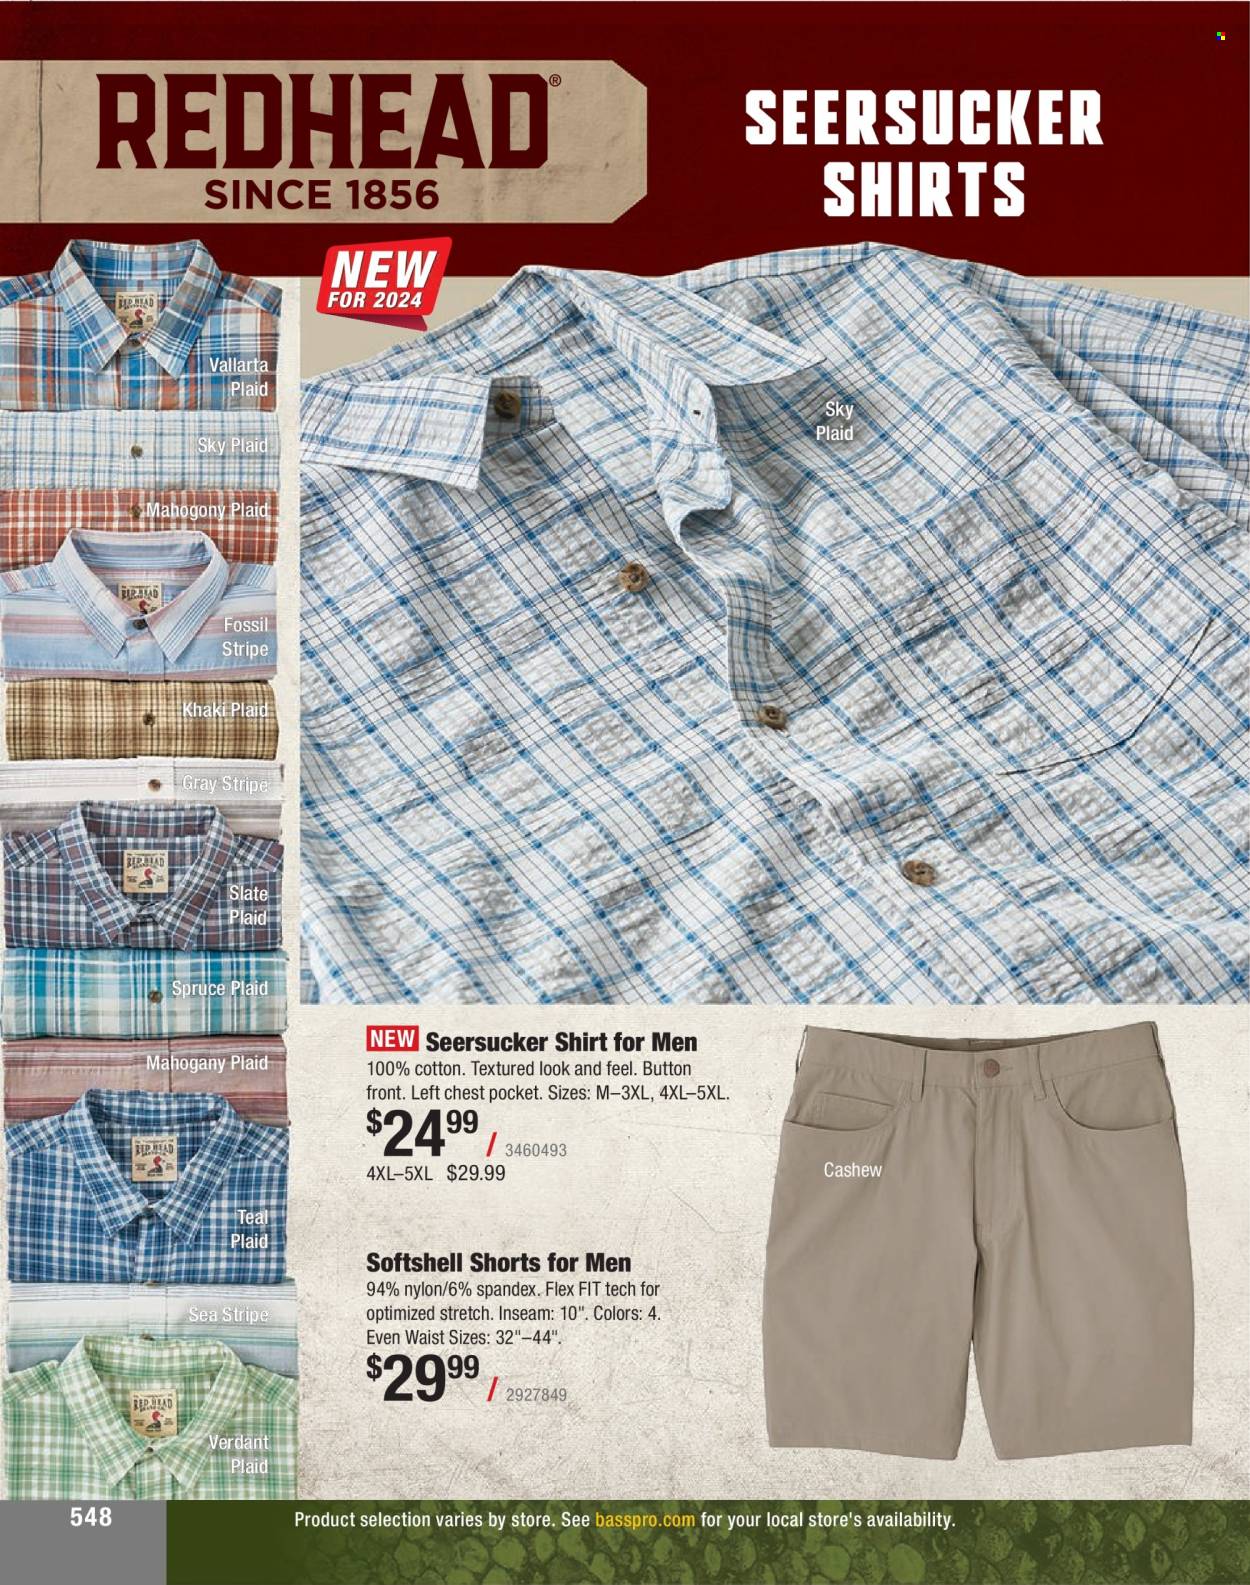 thumbnail - Bass Pro Shops Flyer - Sales products - Fossil, shorts, shirt. Page 548.